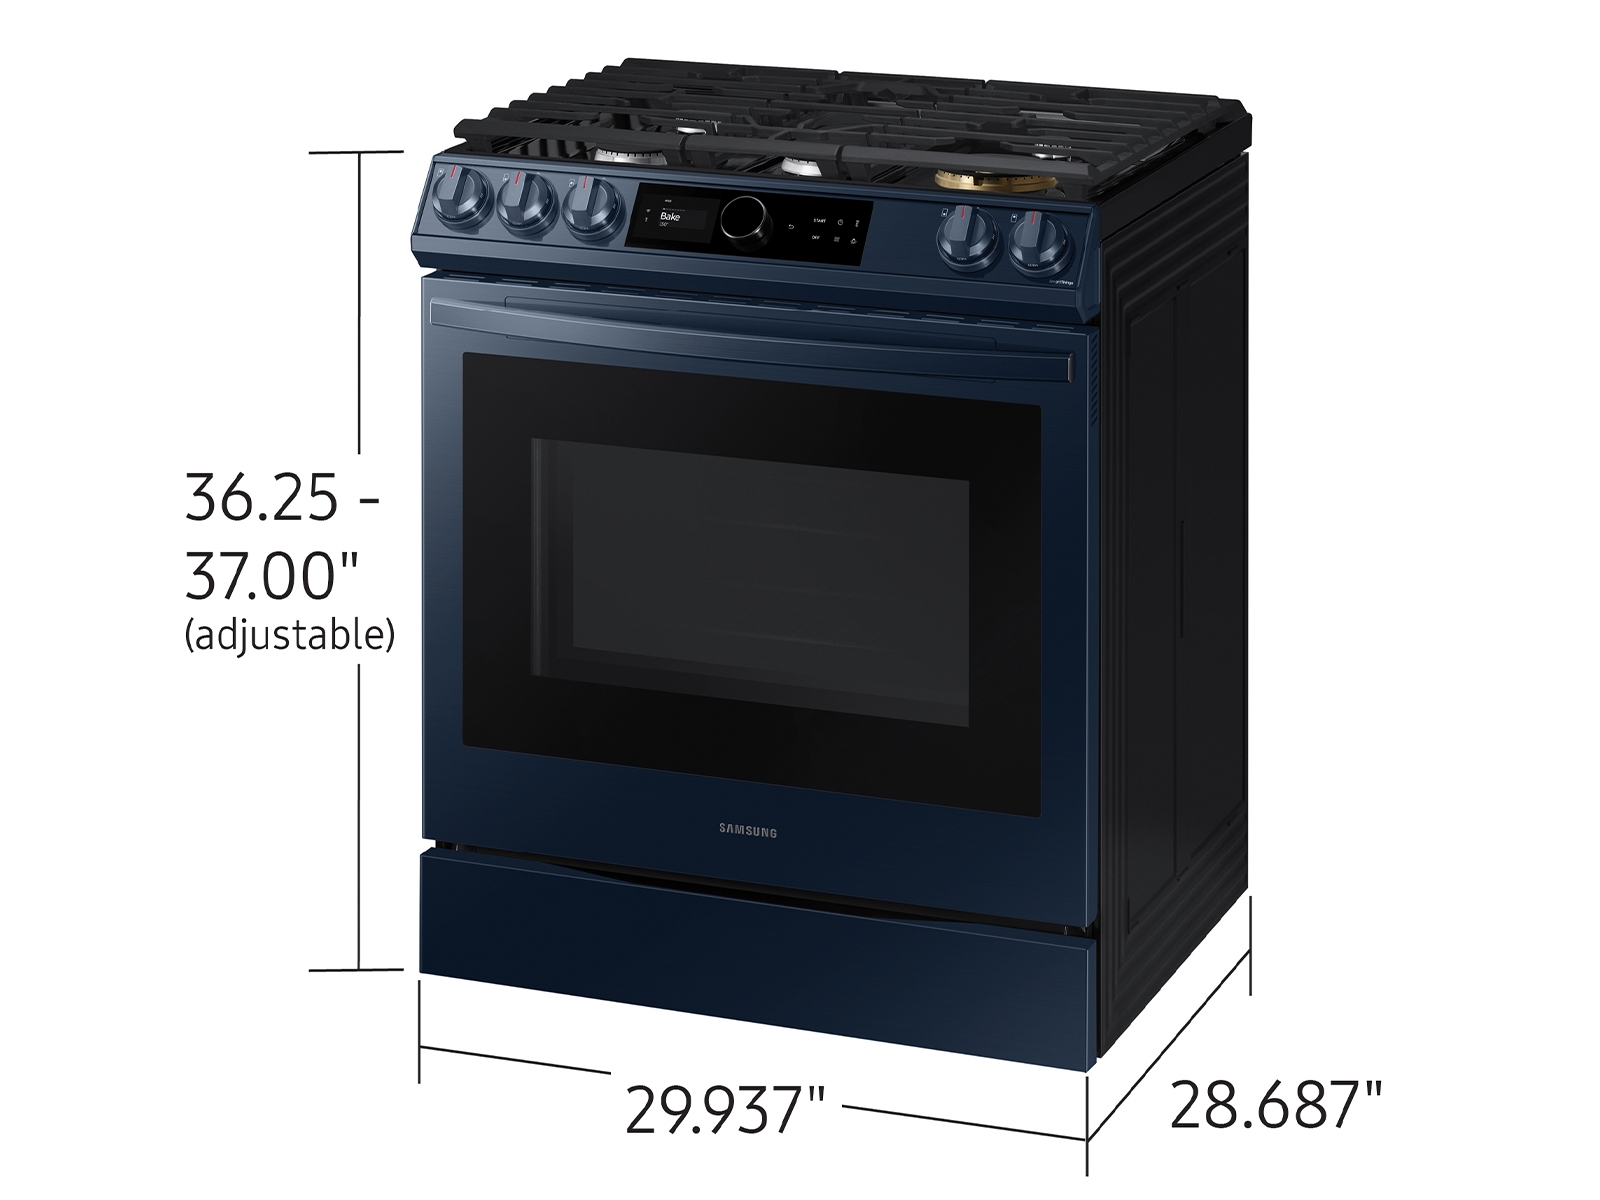 Household multifunctional 32-liter large-capacity electric oven to heat up  and down separately for baking